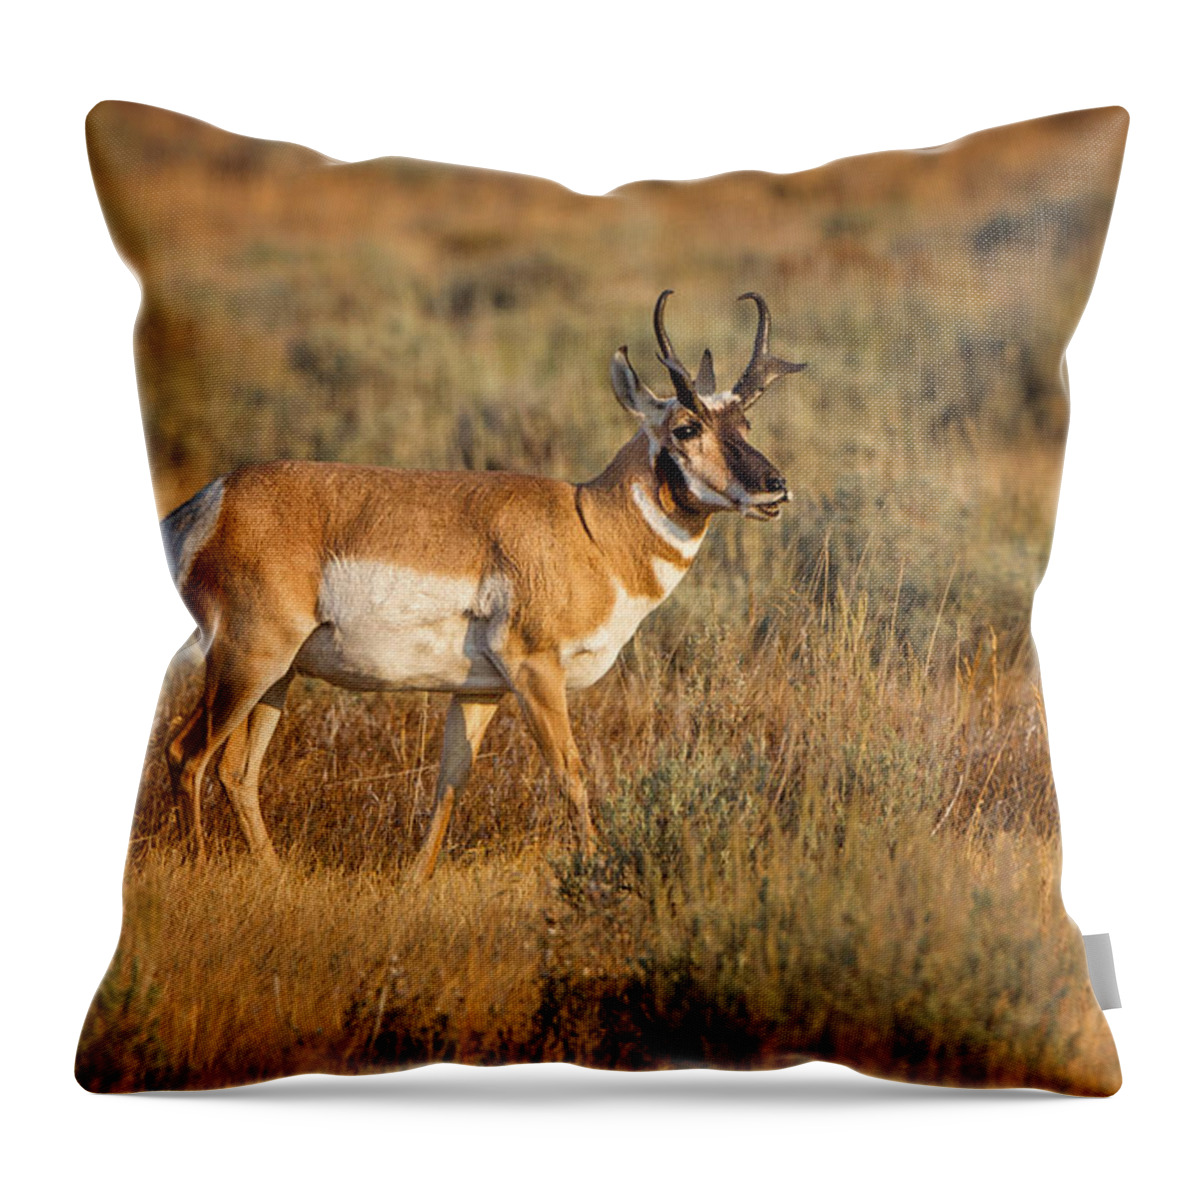 2012 Throw Pillow featuring the photograph Wyoming Pronghorn by Ronald Lutz